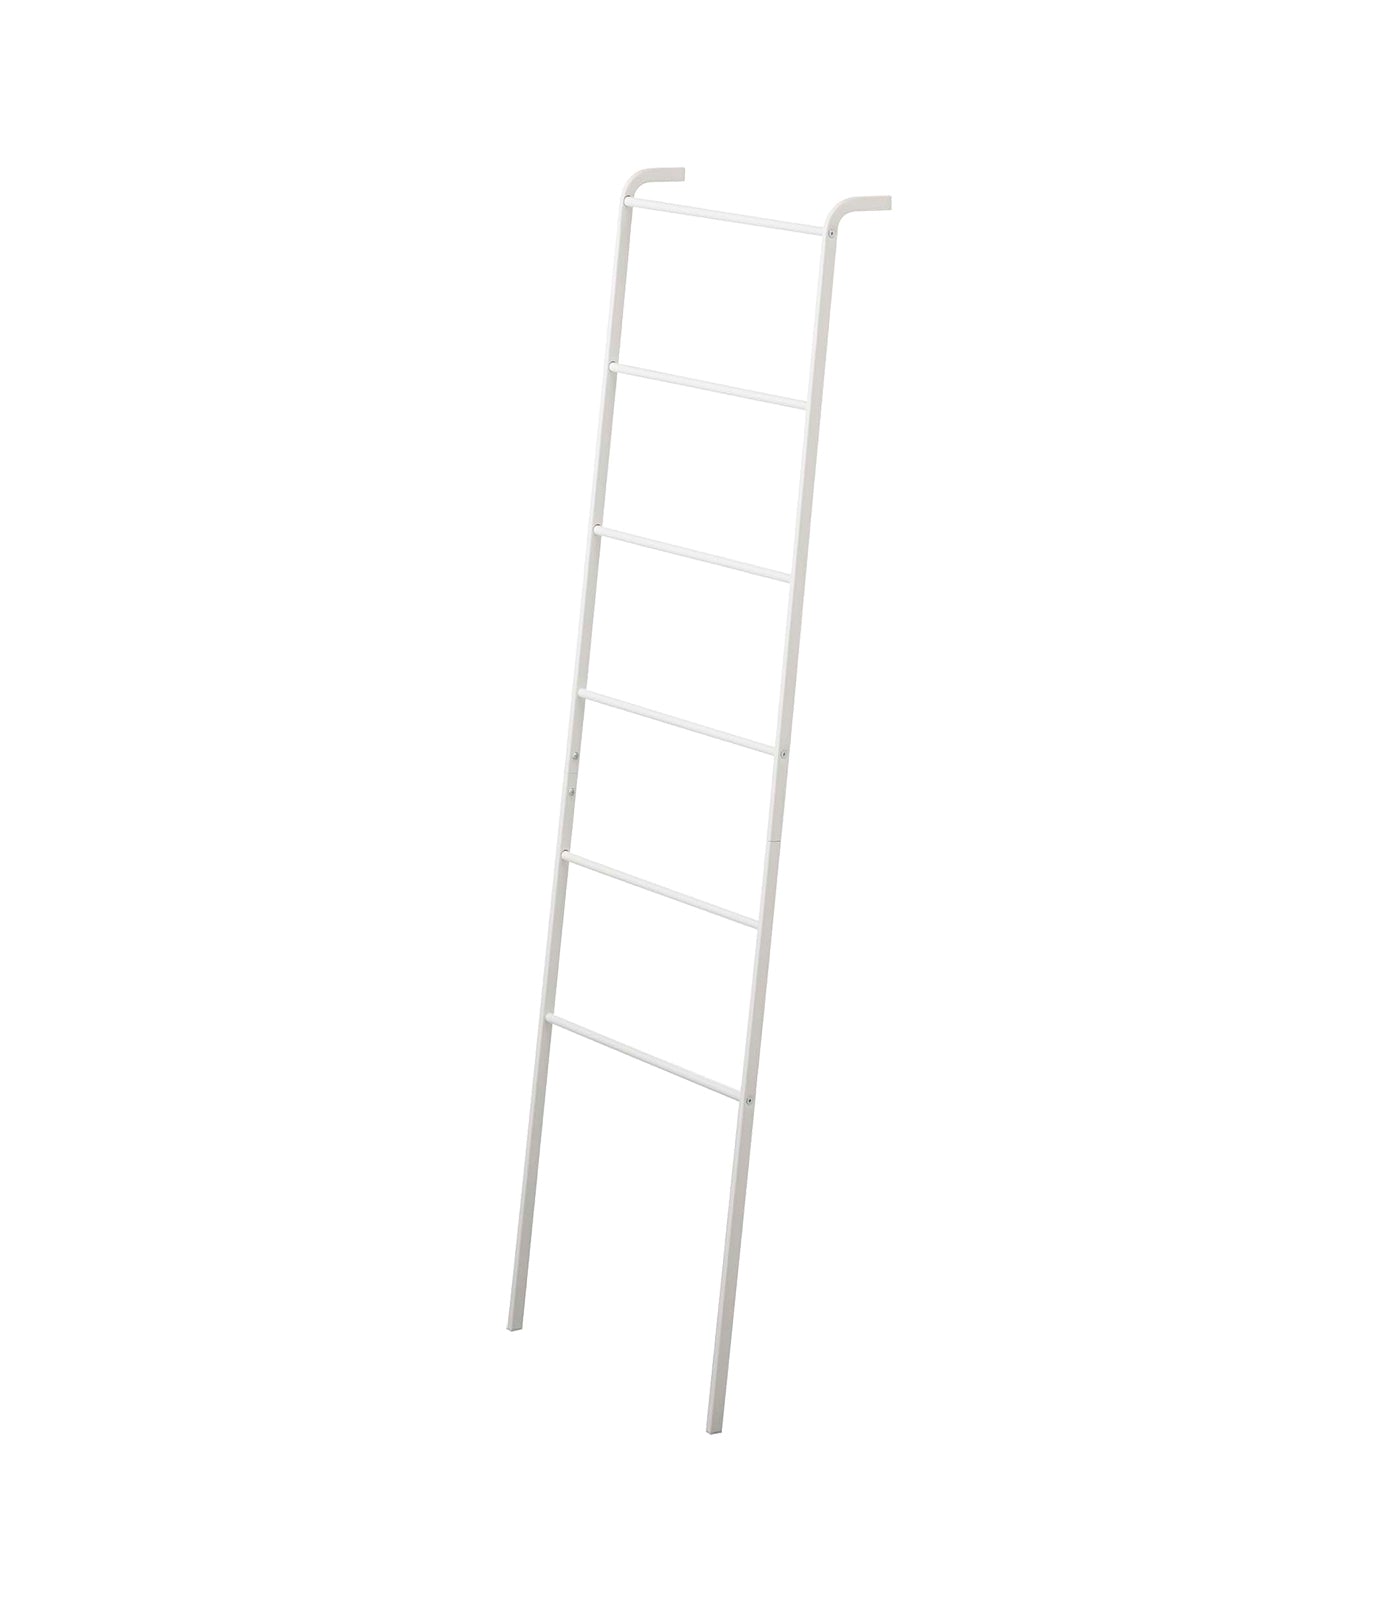 Leaning Ladder Rack on a blank background.